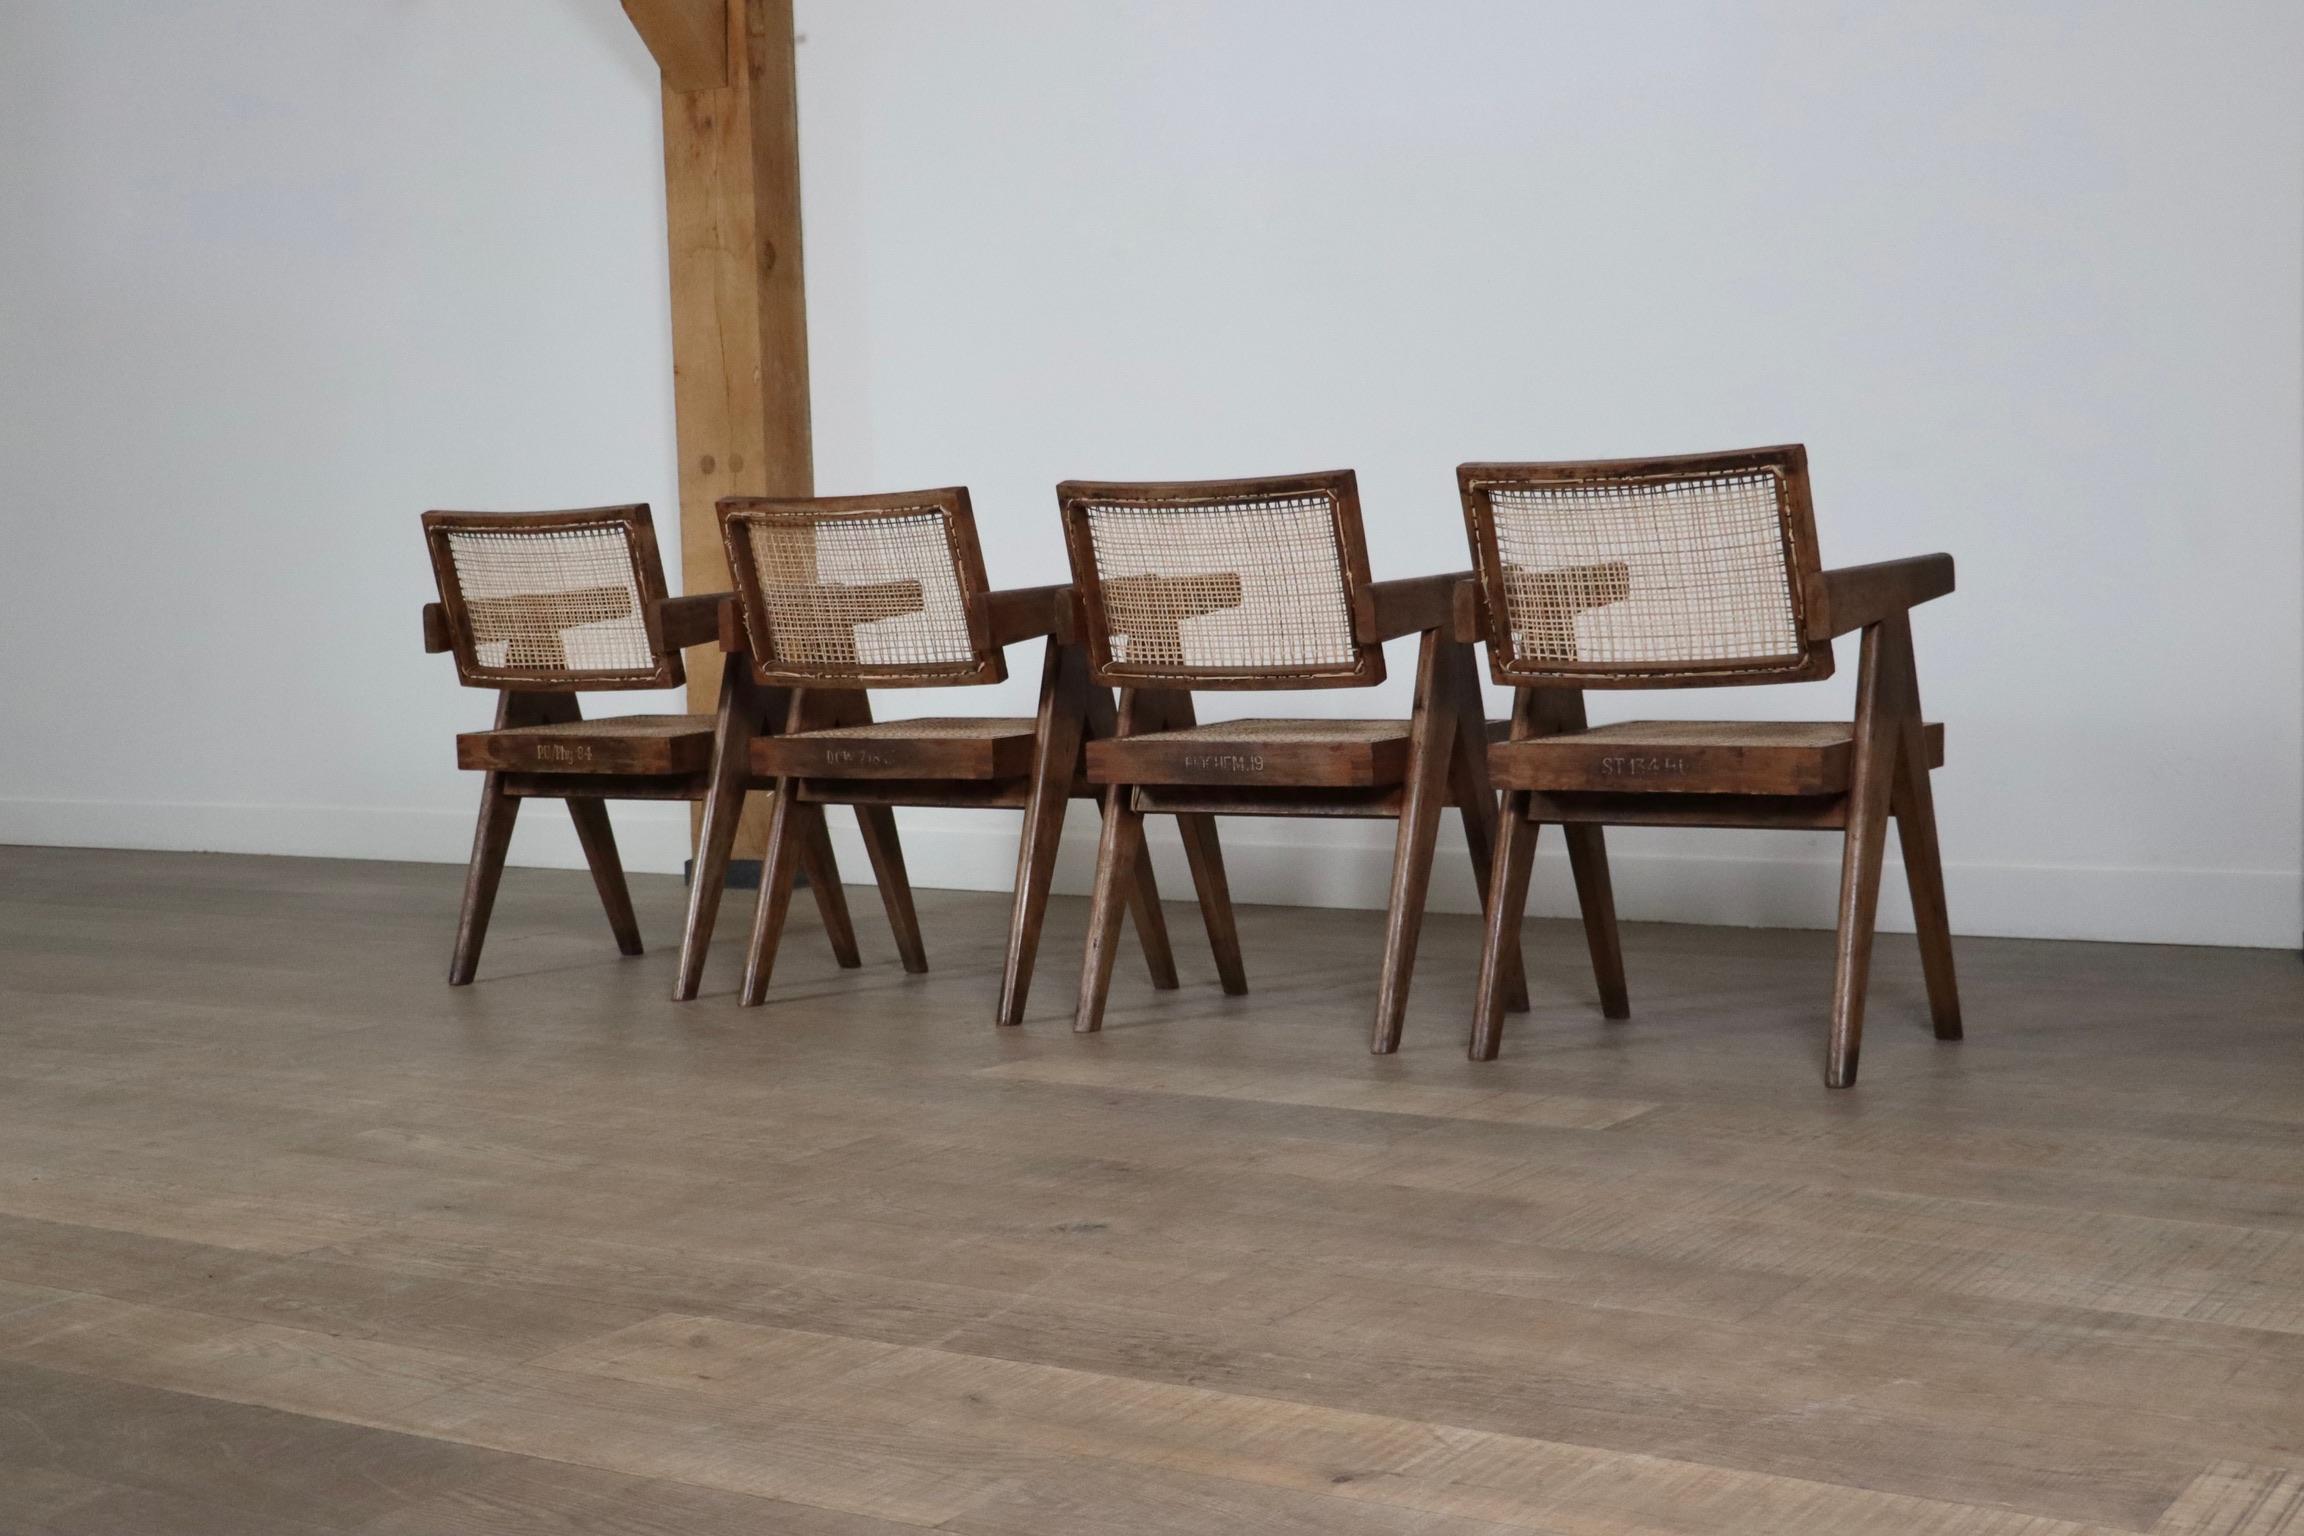 Pierre Jeanneret Office Cane chairs, India 1950s For Sale 9